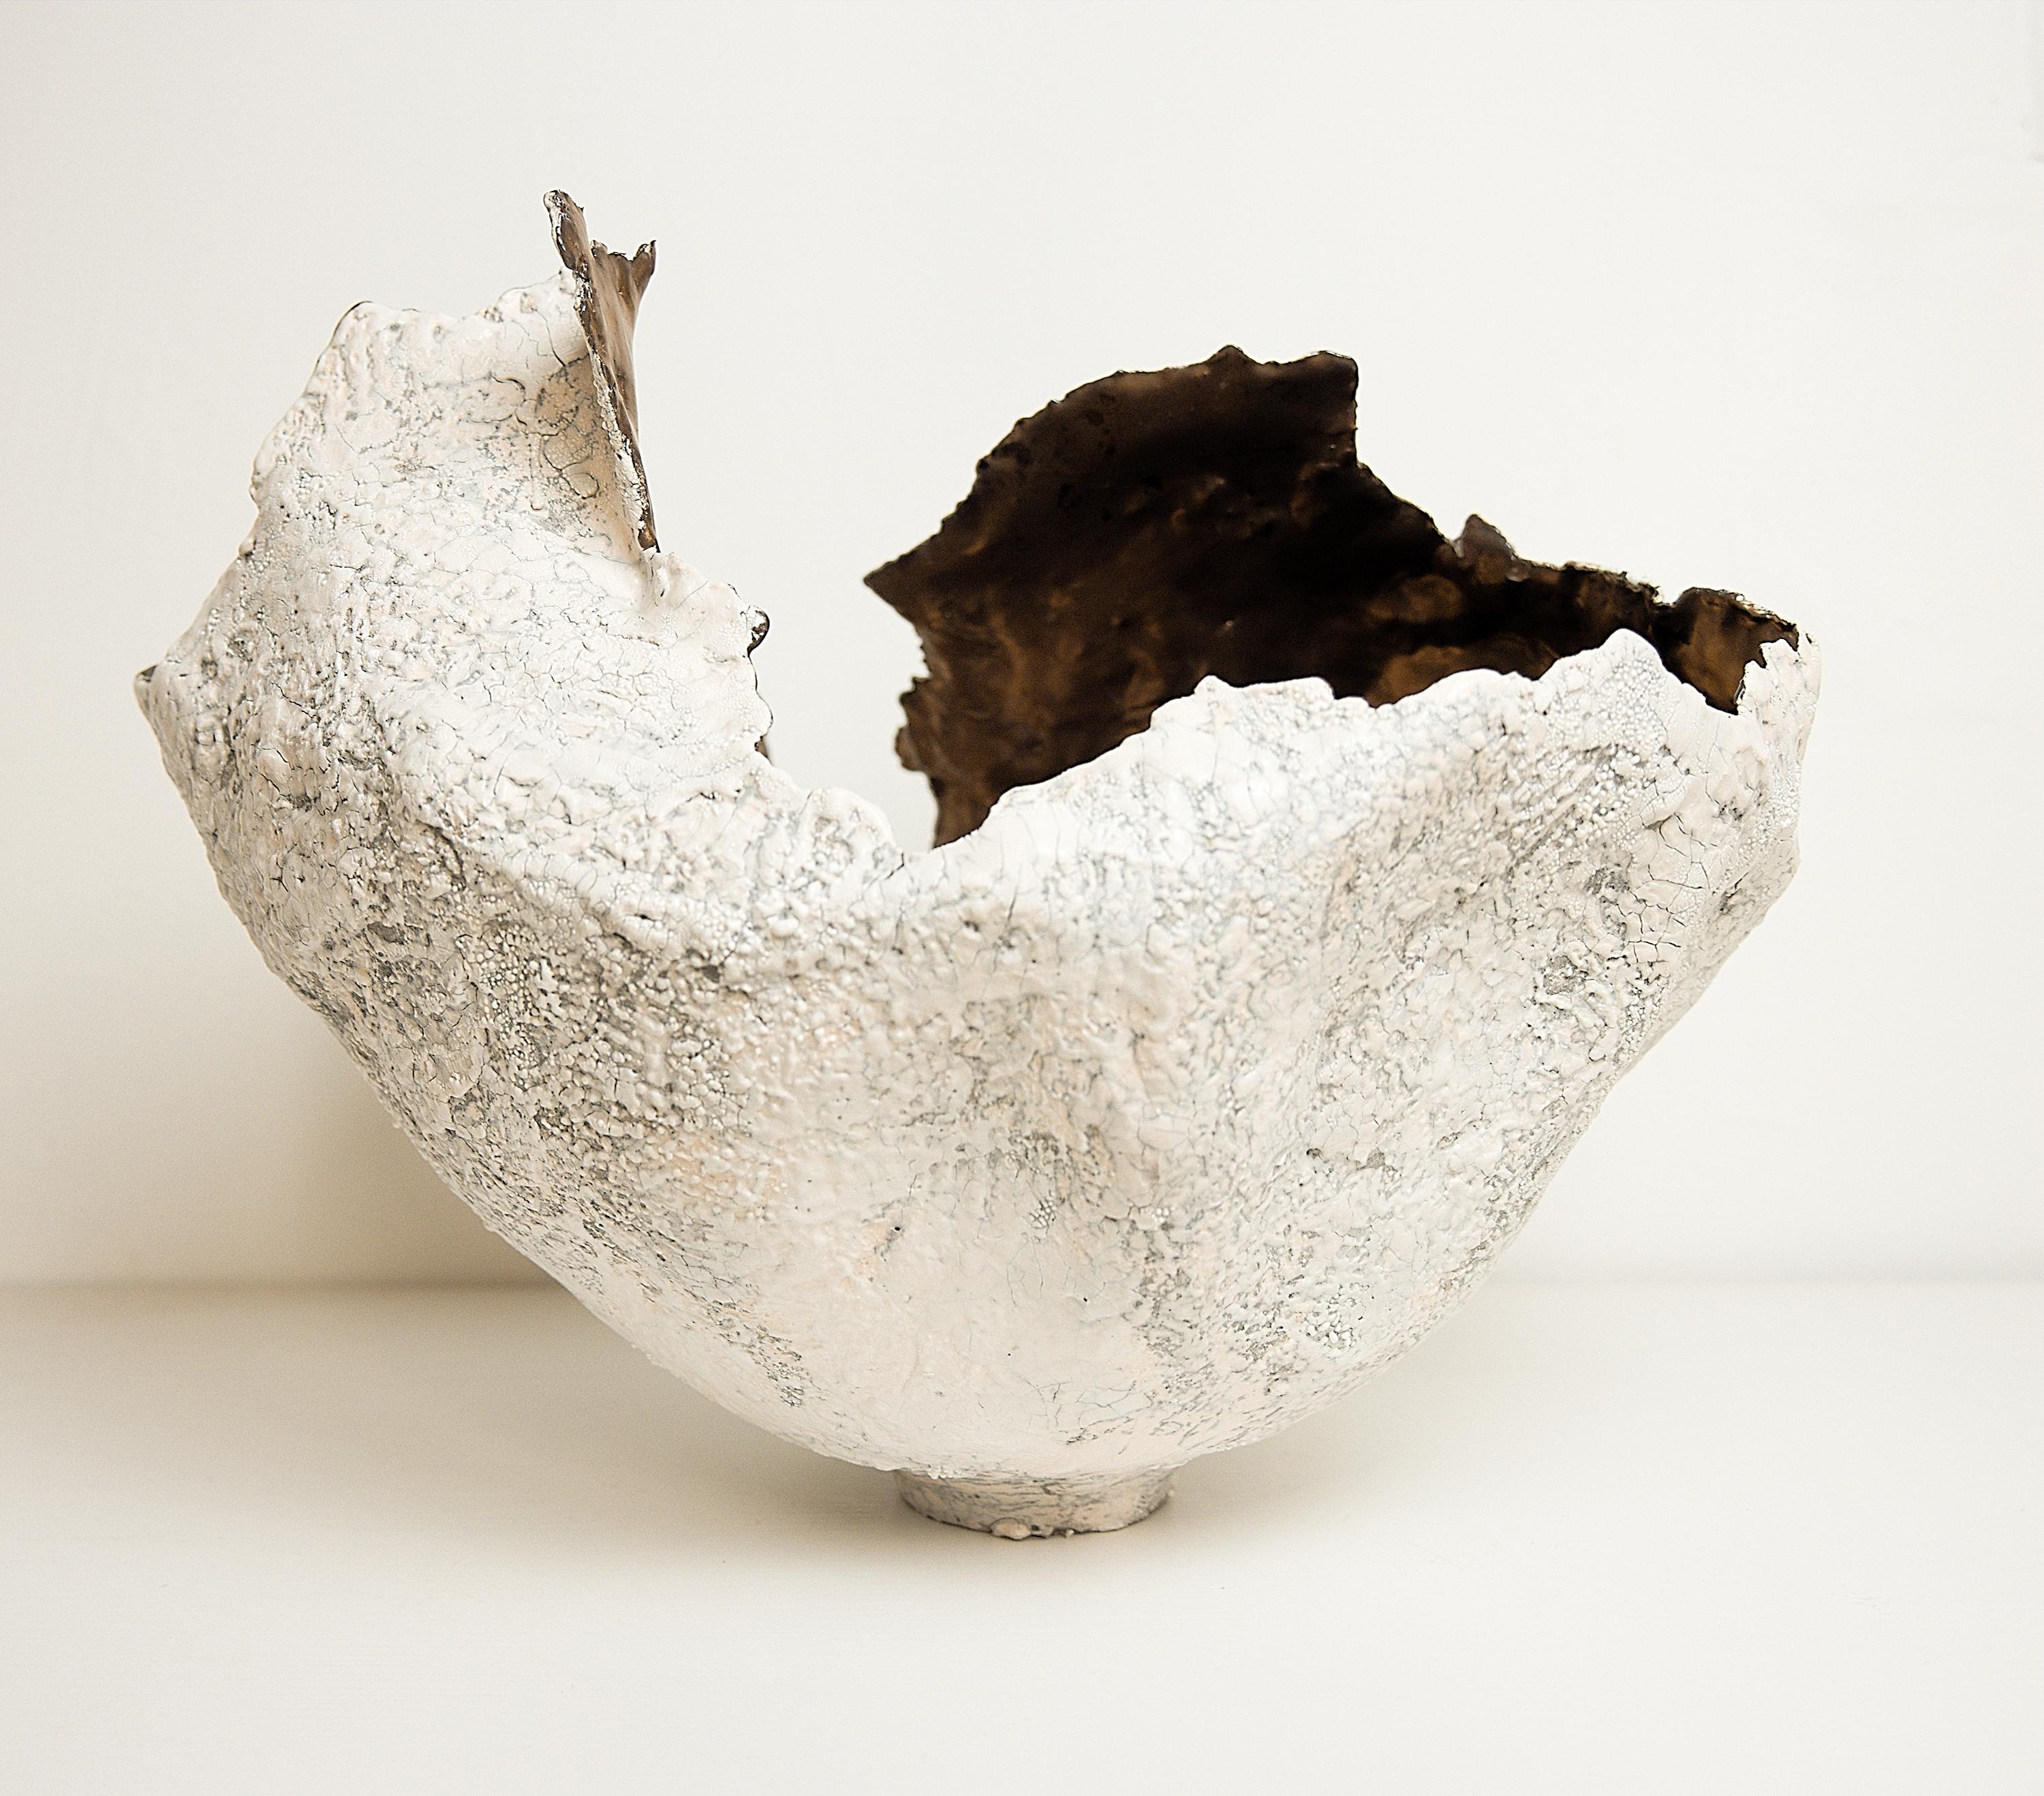 Bring a touch of modern style to your home with our Drift Torn Edge Vases
one of kind 
this White open  jar with Textured drips and lava glaze
one of a kind
saturated GOLD inside. one of a kind 

., each striking vase features a unique, moon-like